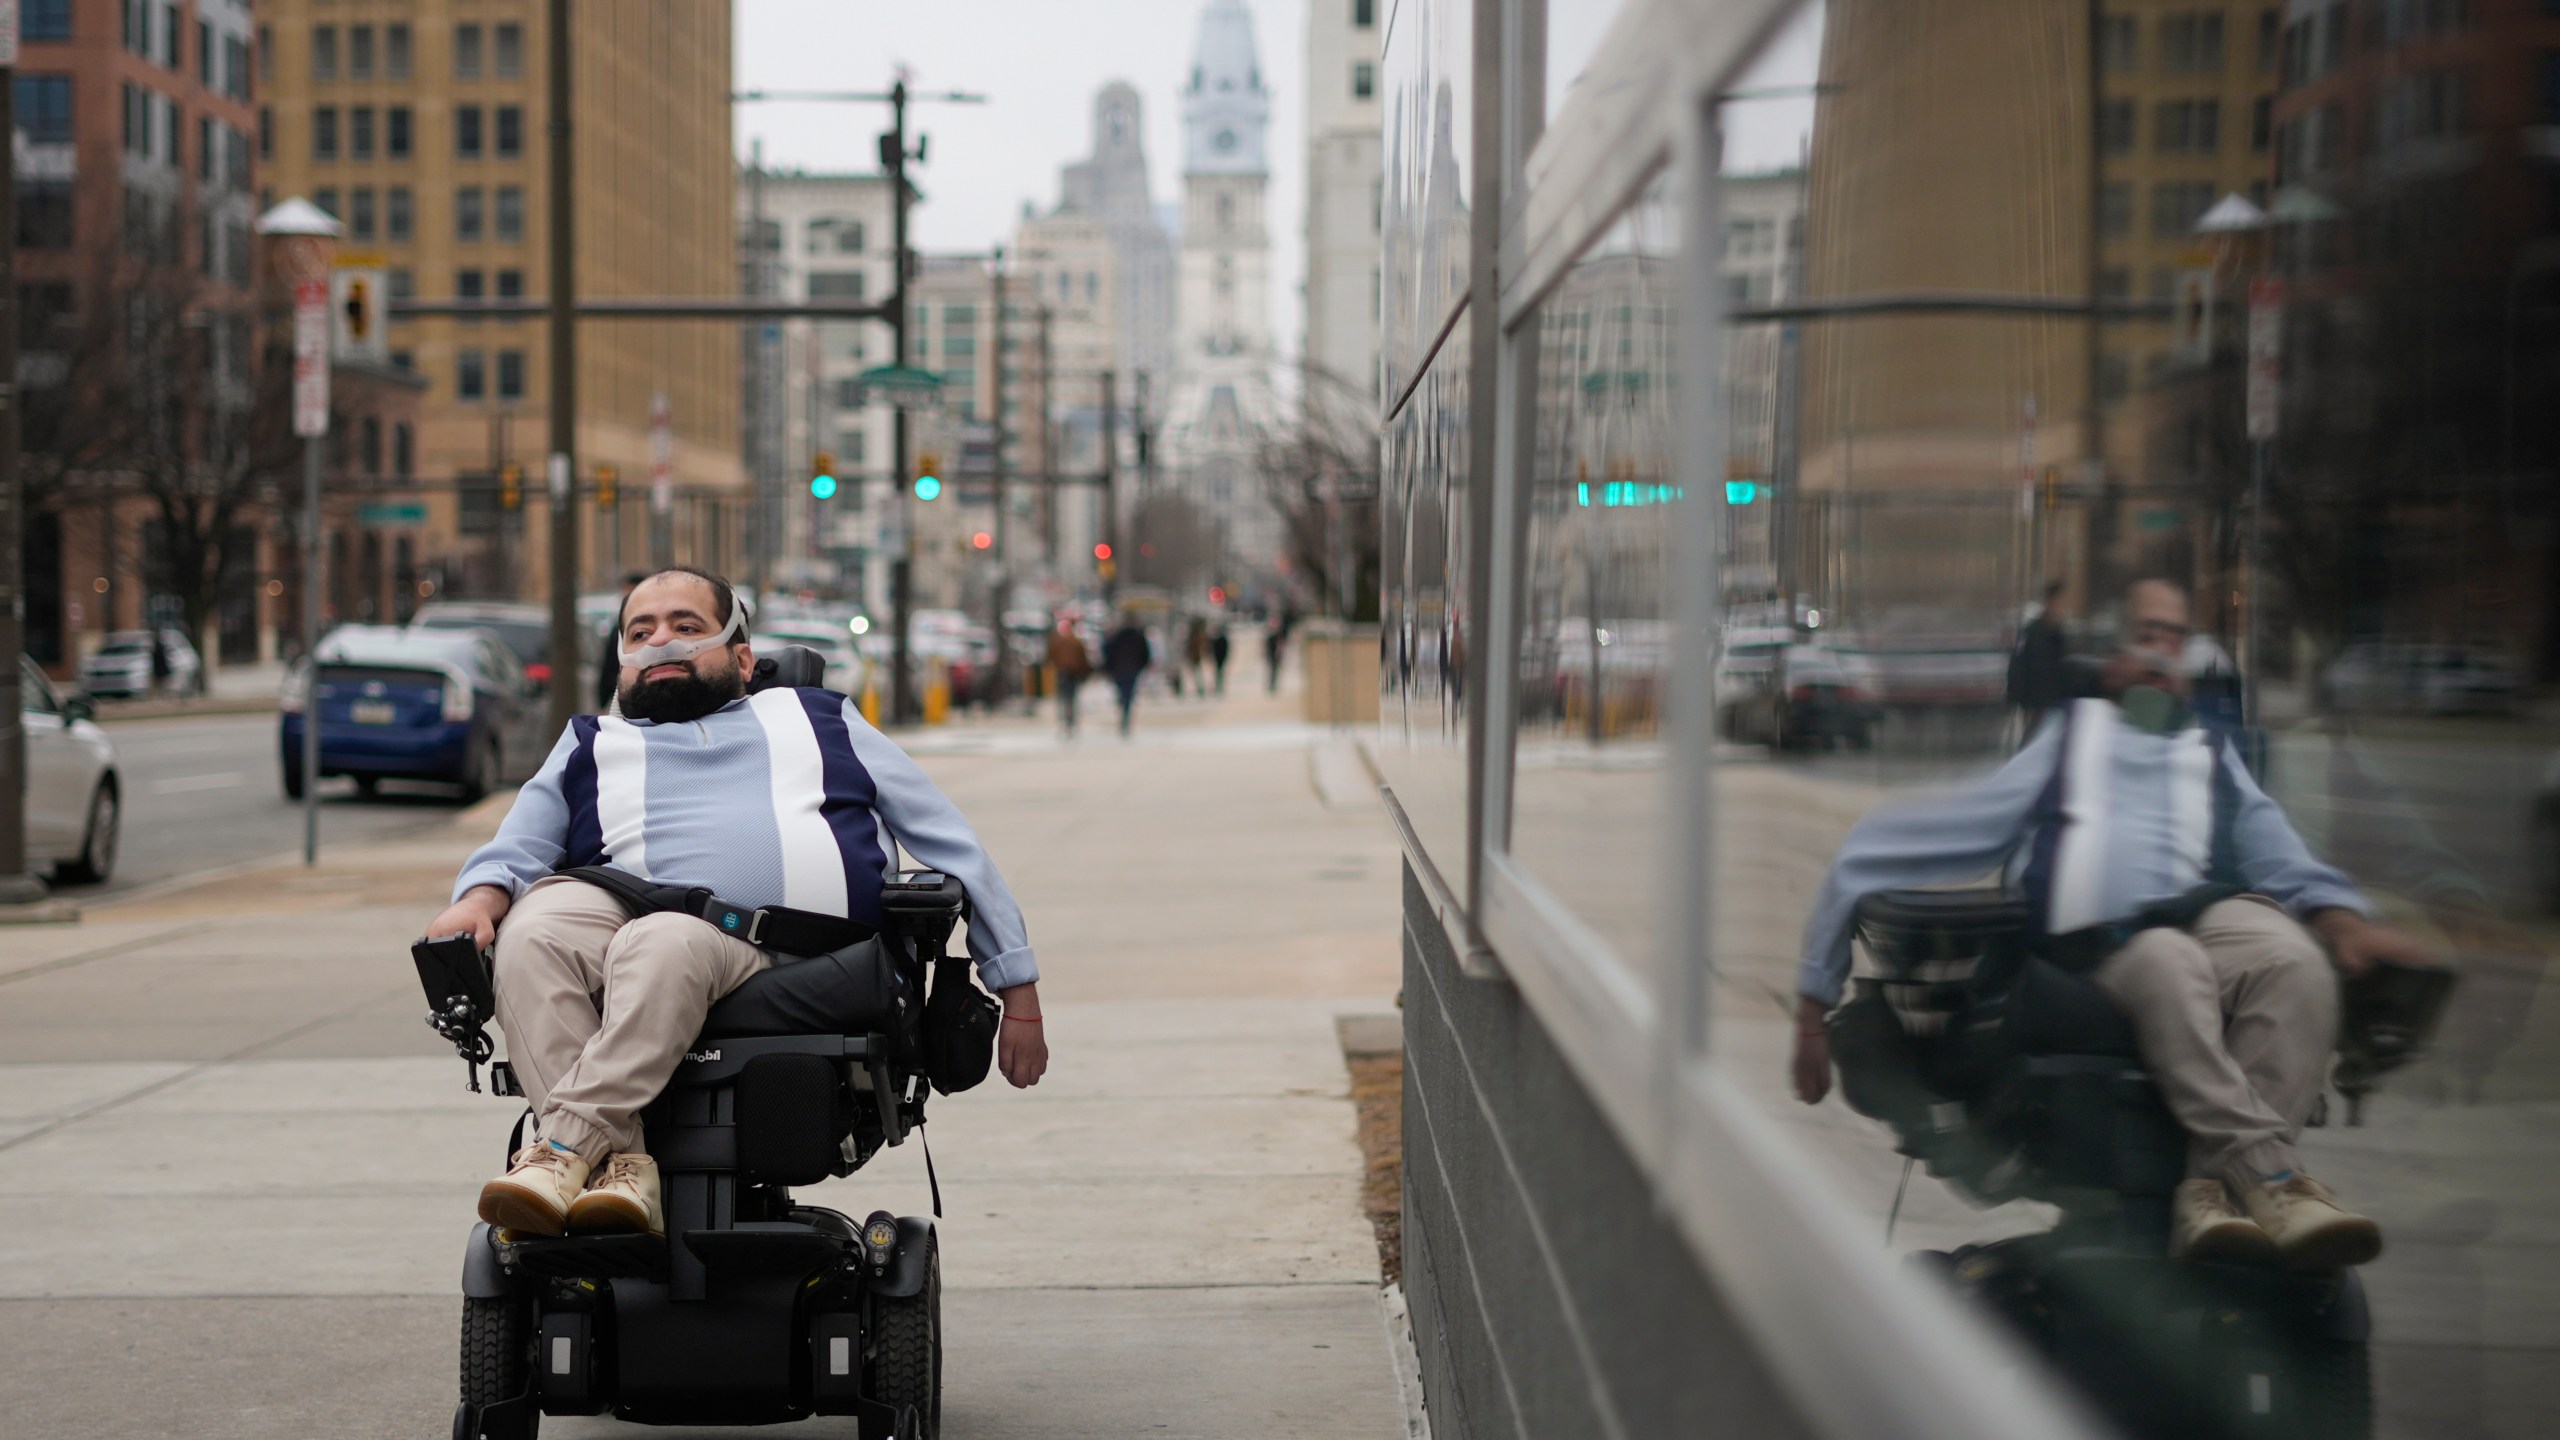 Temple University doctoral student Jaggar DeMarco poses for a portrait while utilizing a battery powered ventilator in Philadelphia, Wednesday, March 6, 2024. “I’m constantly angry that my life and what I can do with (it) is sometimes determined by insurance companies and bureaucracy,” says DeMarco, who has chronic respiratory failure. (AP Photo/Matt Rourke)